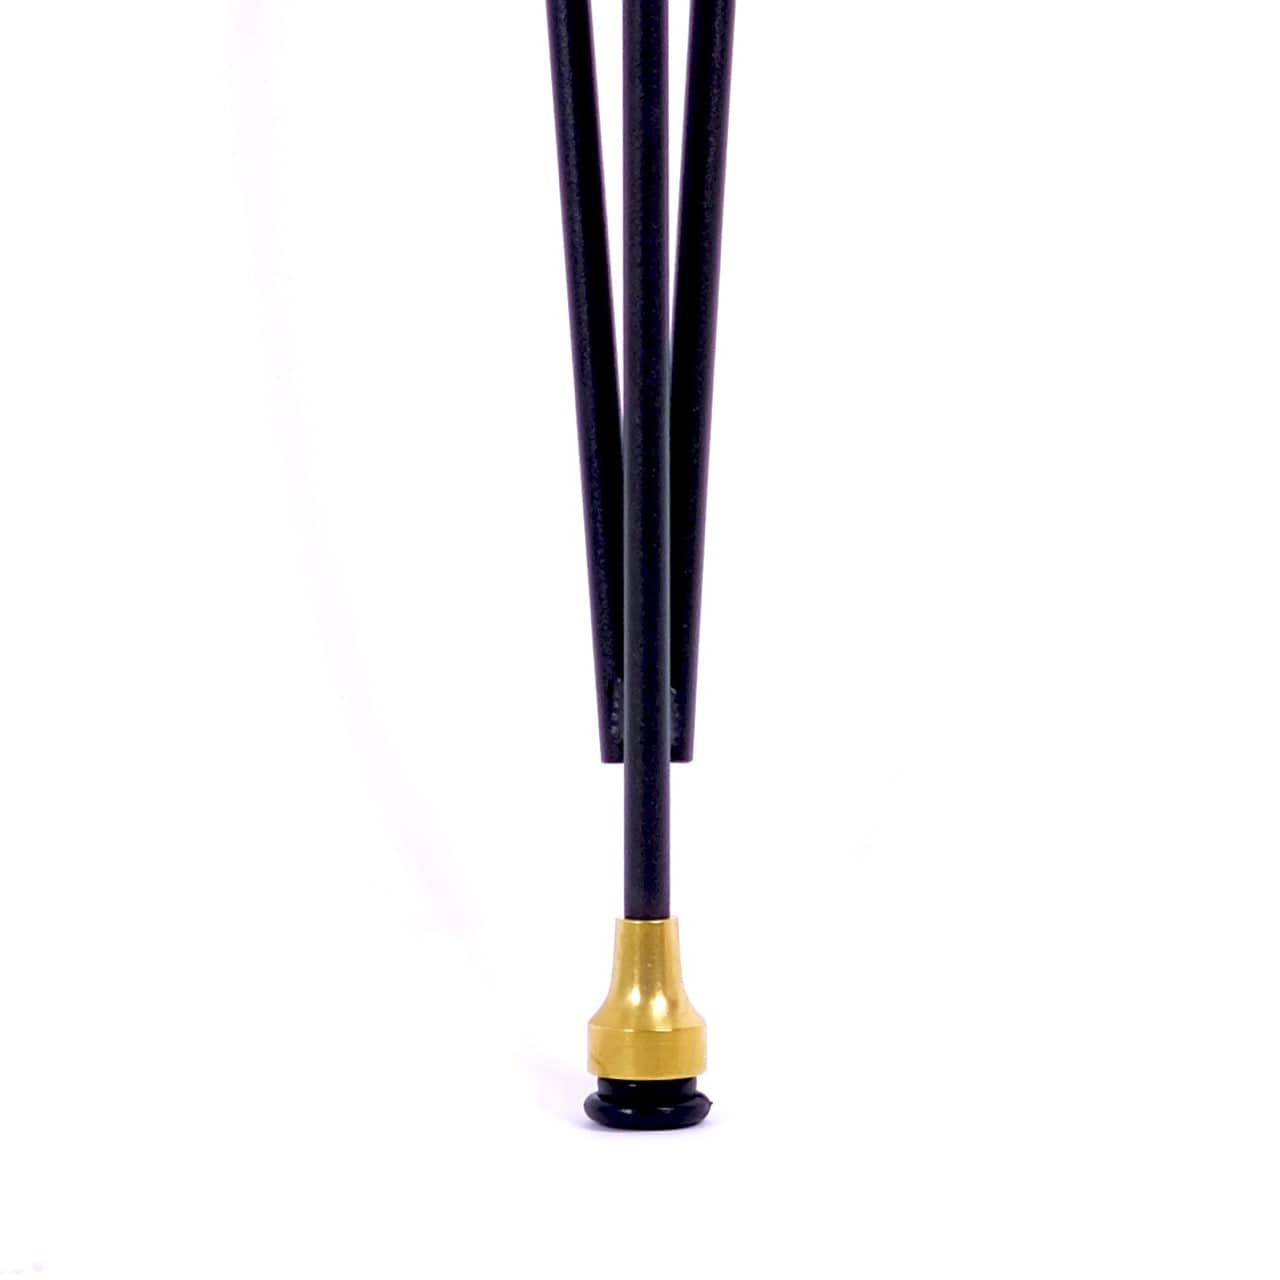 Black and Brass Original Table Leg with Leveler